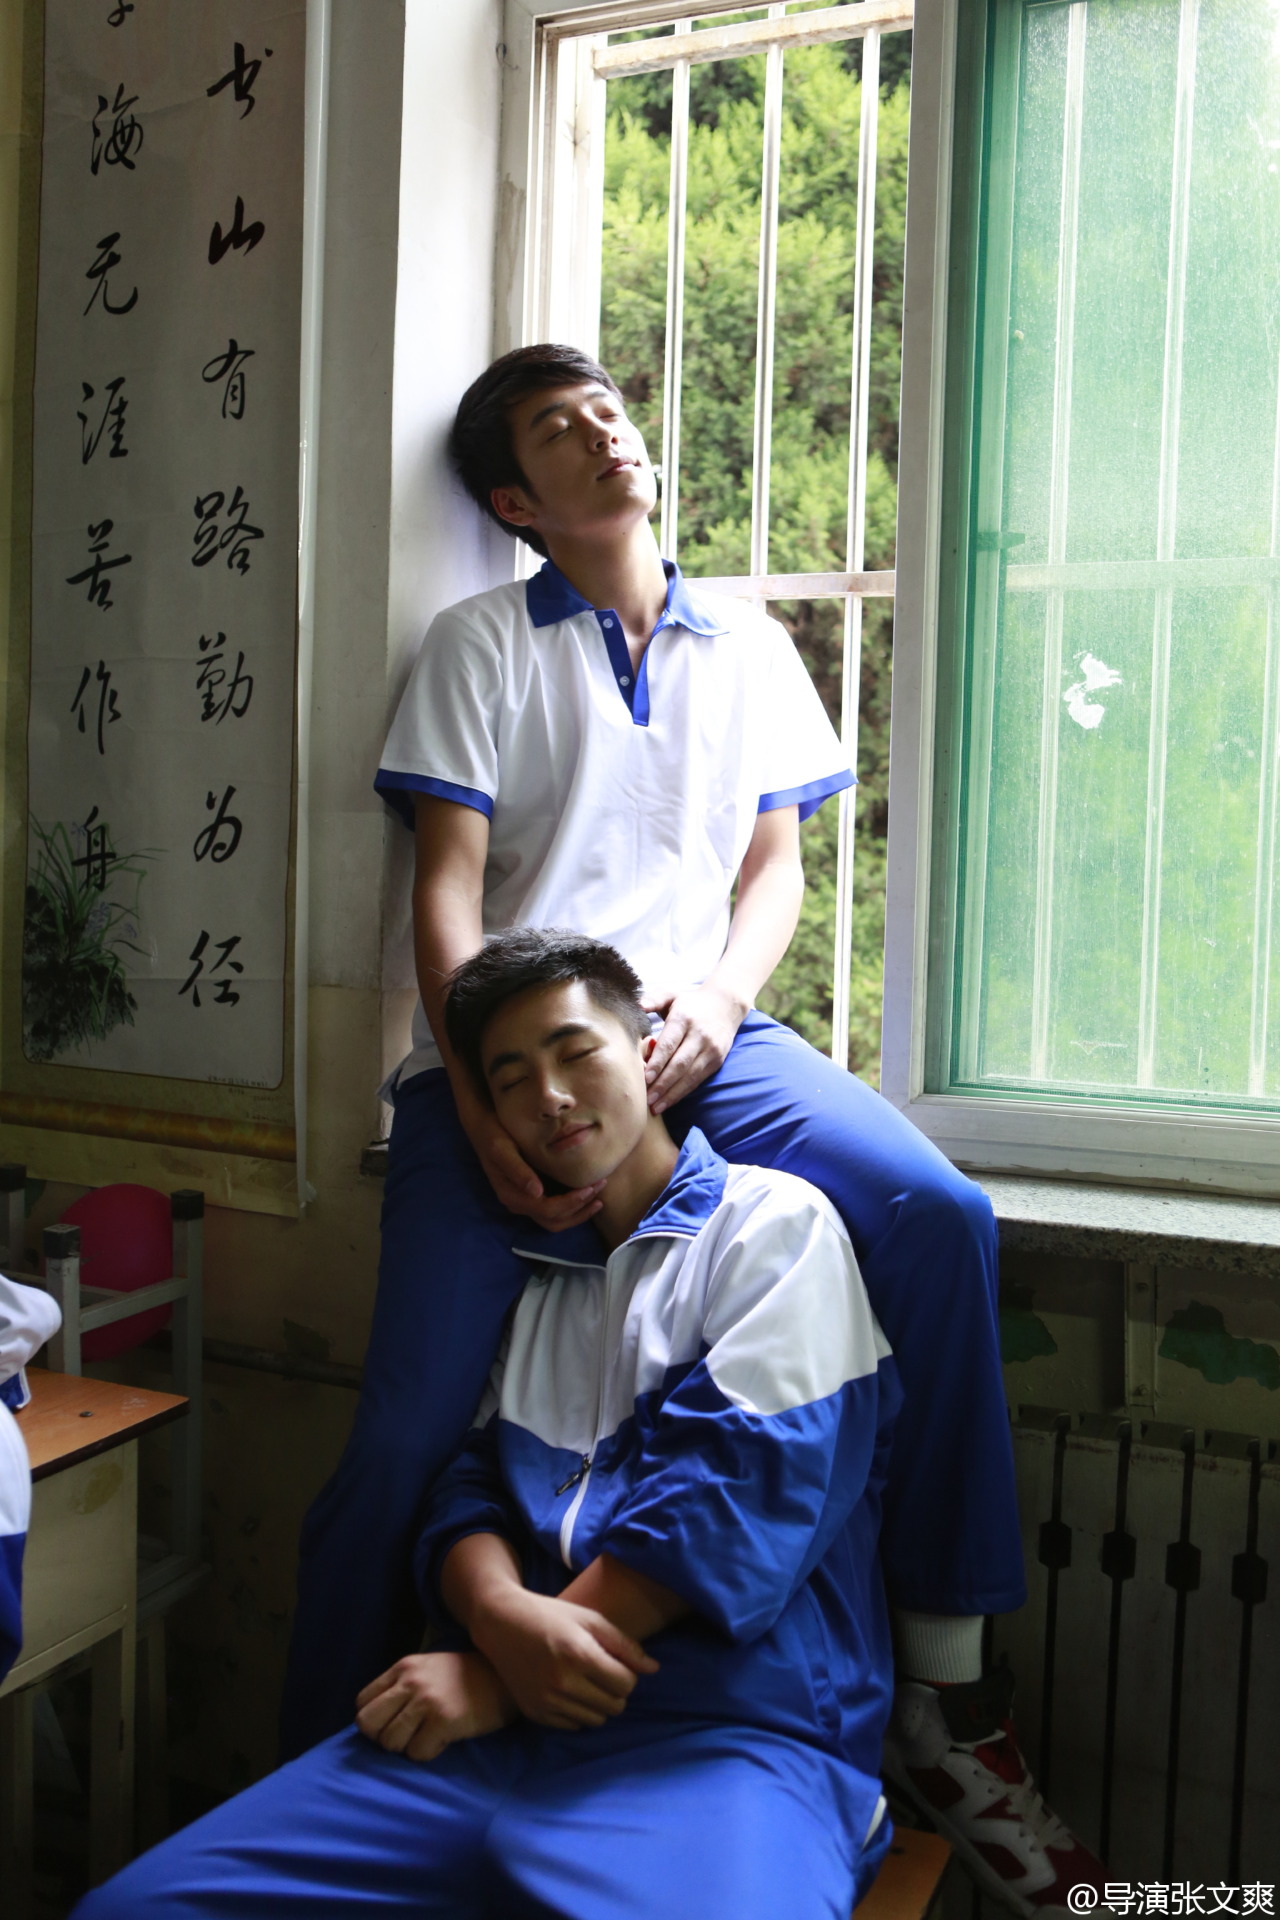 asianboysloveparadise:     Chinese Gay Movie: Be Here For You Watch it here with